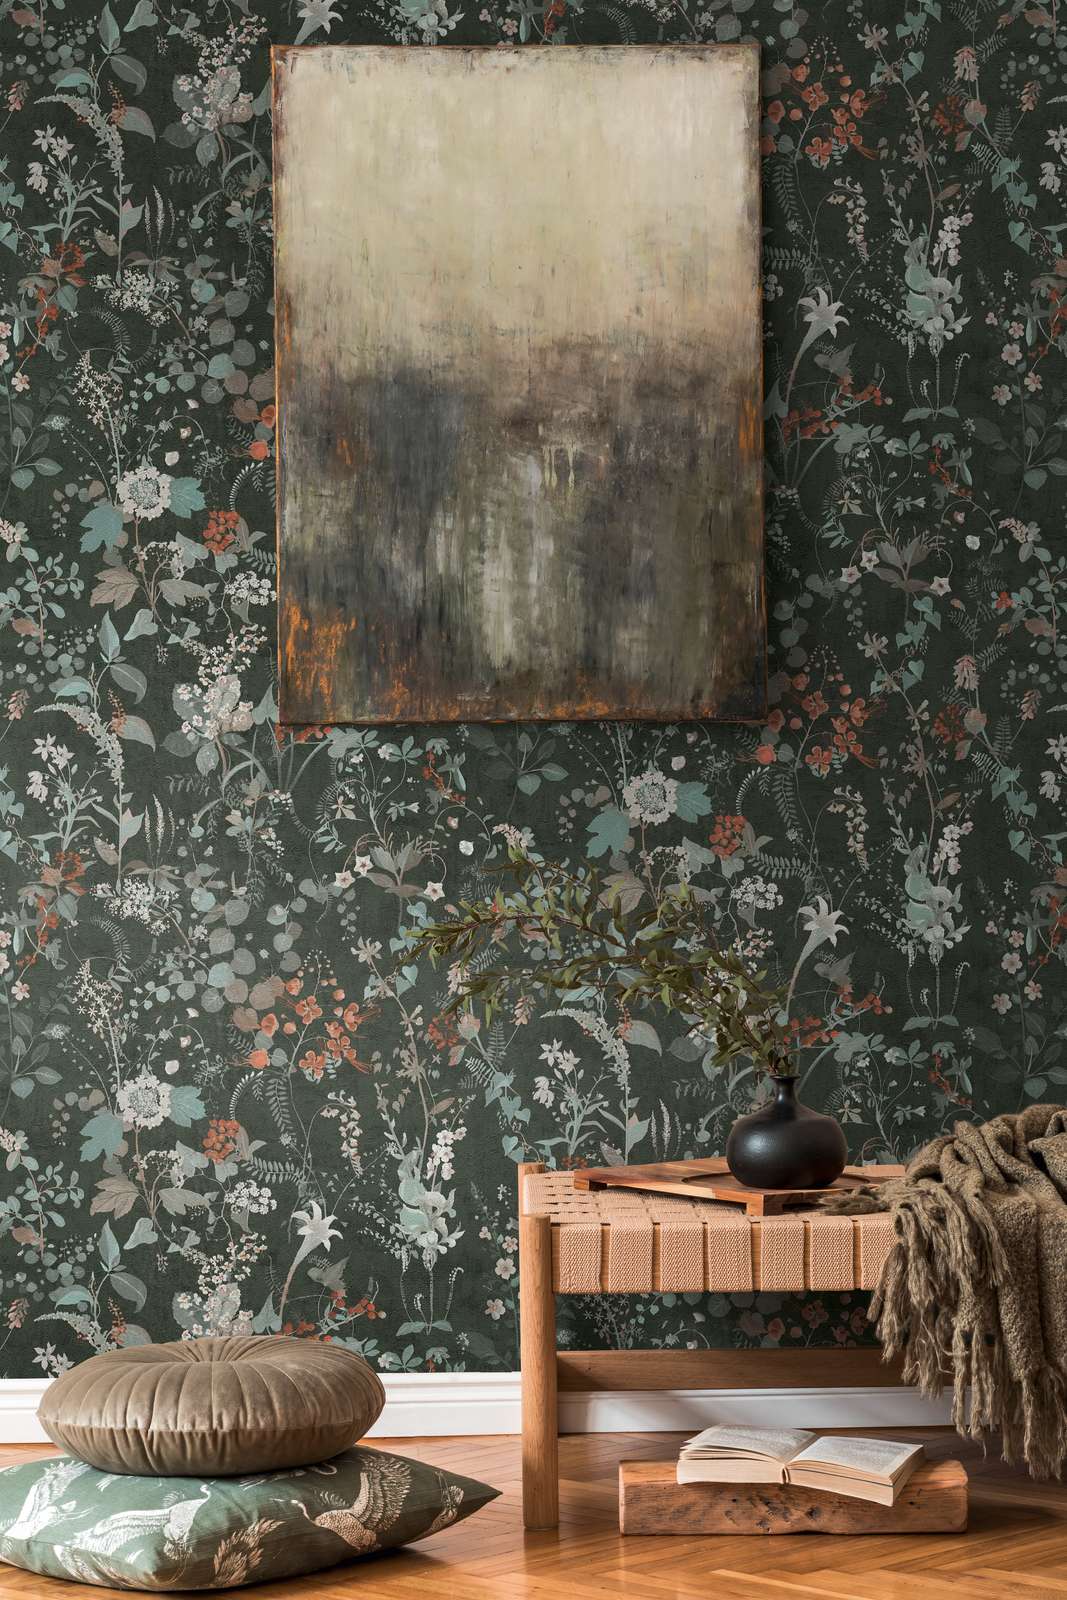             Black floral wallpaper with flowers pattern in grey and green
        